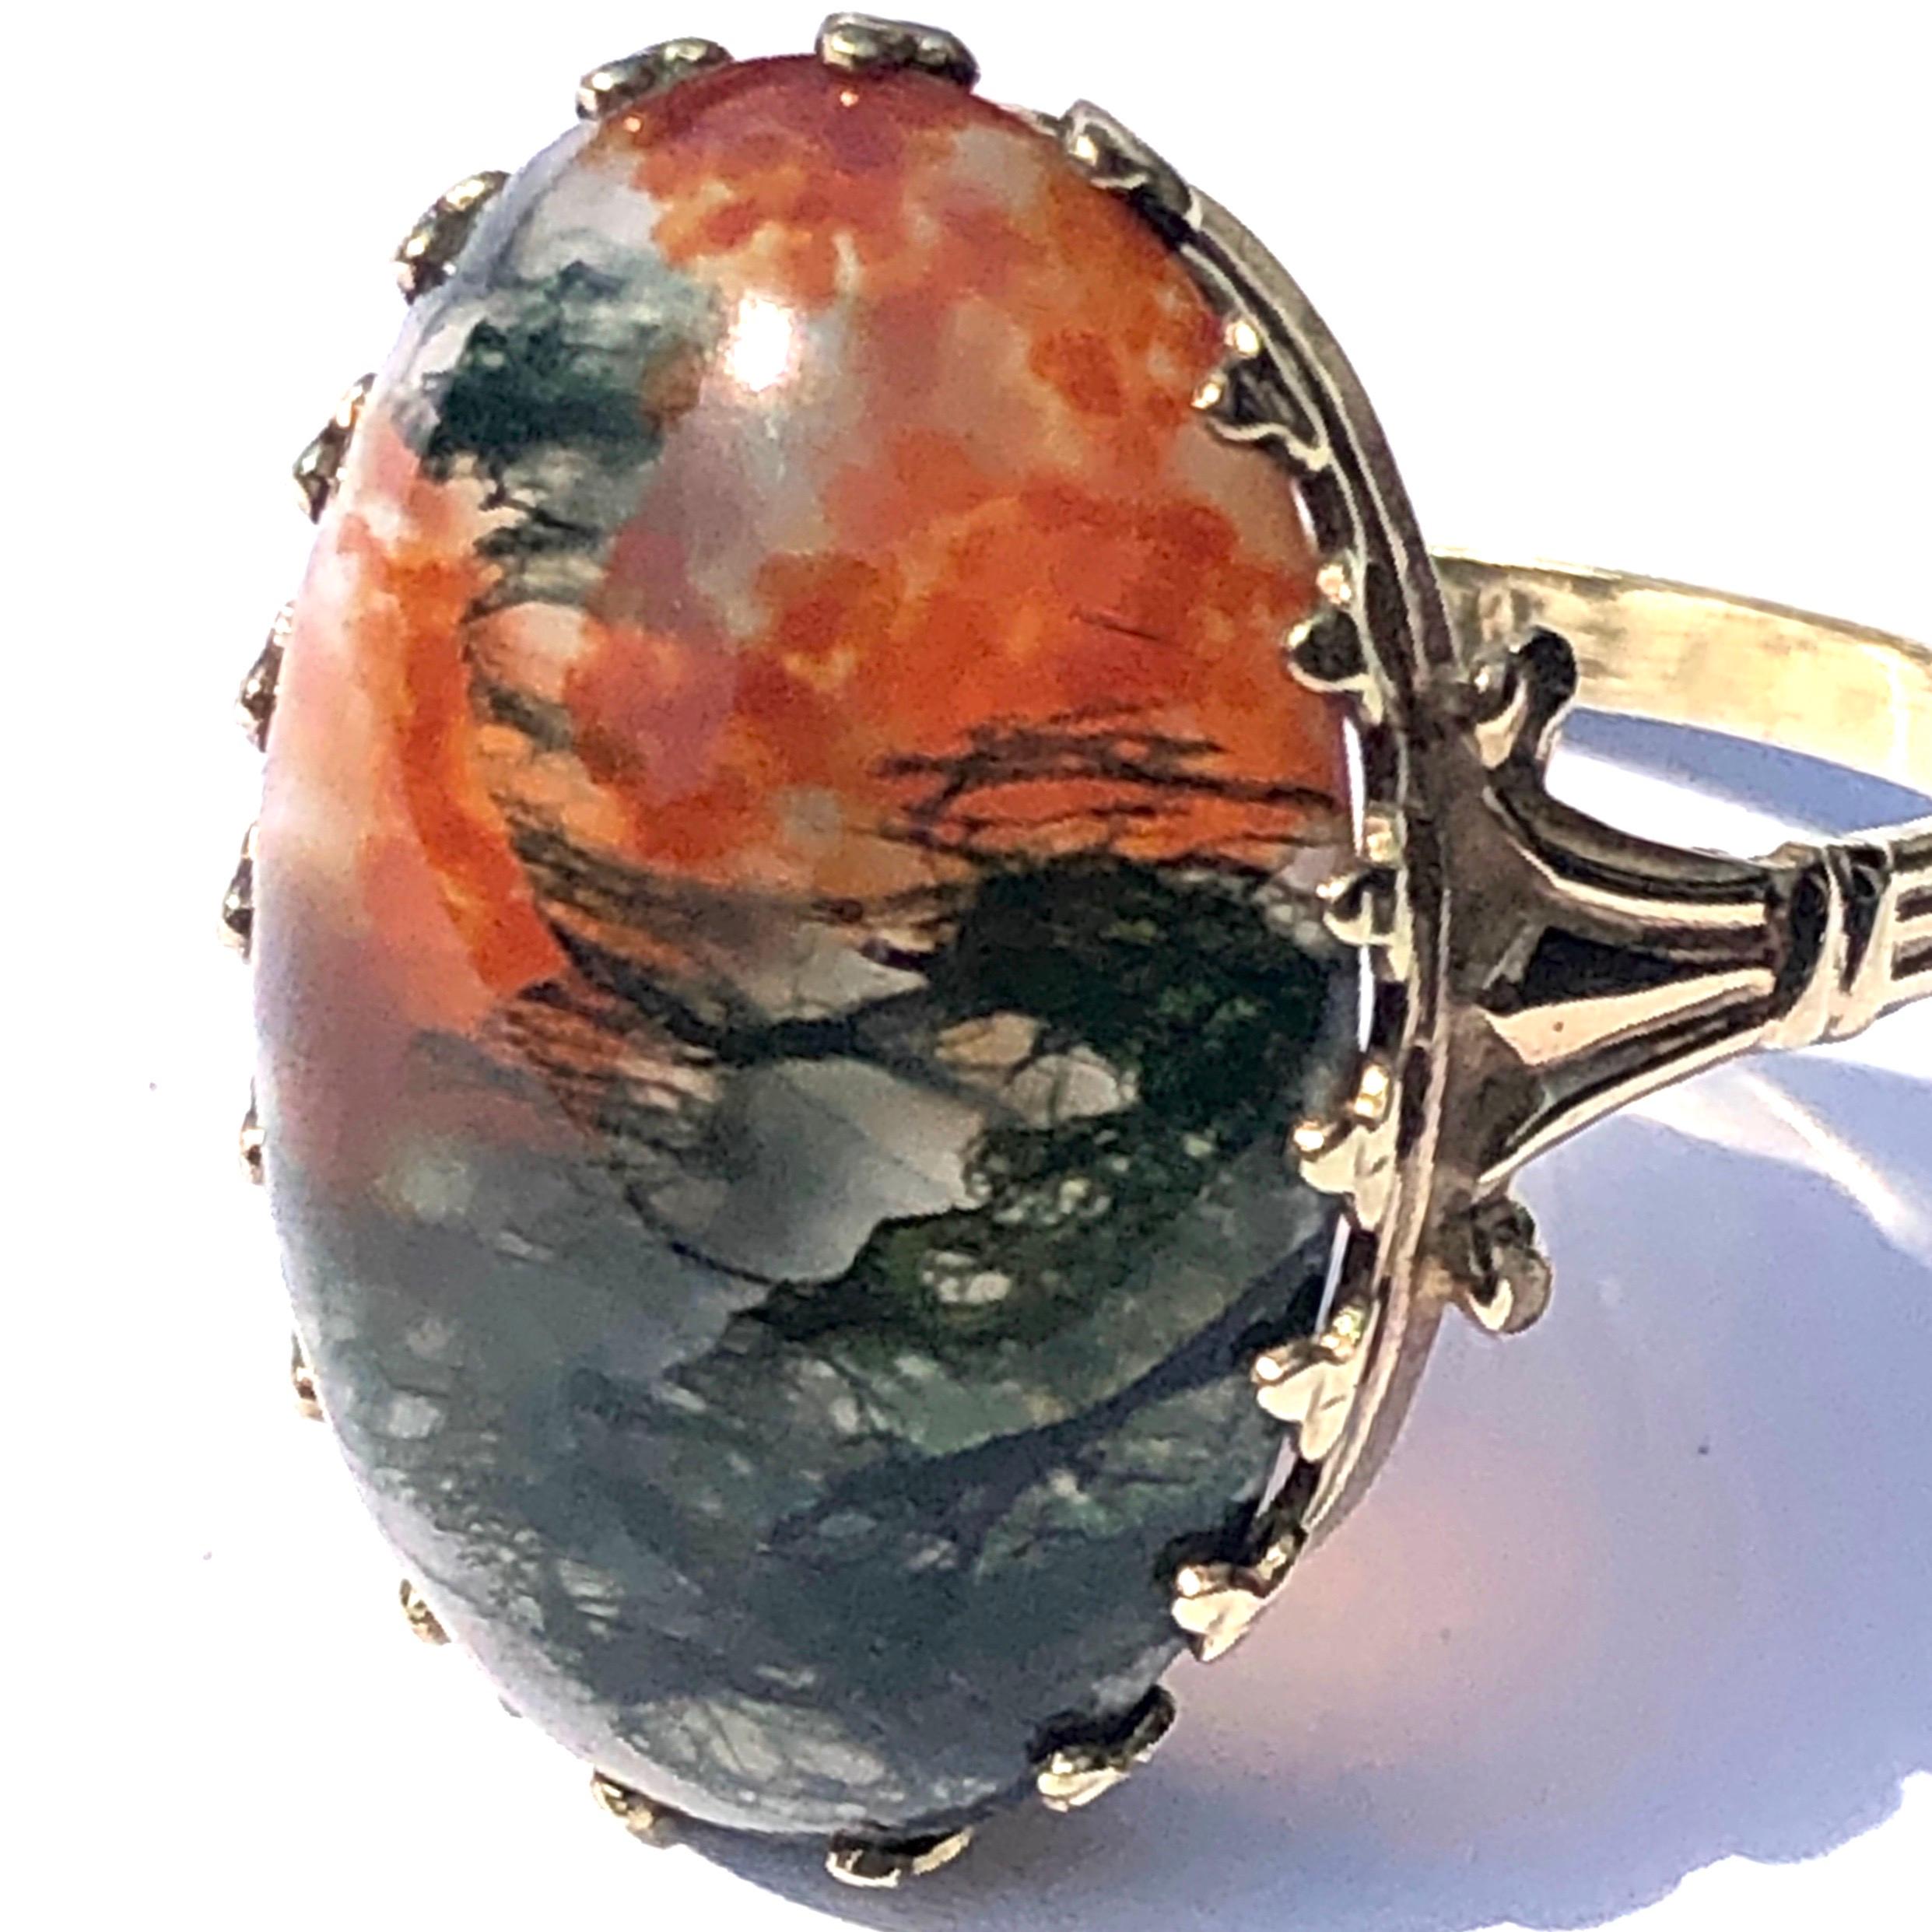 Set into the 9ct gold ring is a gorgeous moss agate with so many wonderful colours marbled through it. The stone has a rich red and orange colour and also a dark green with all tones in-between running through it. The setting is almost crown like in